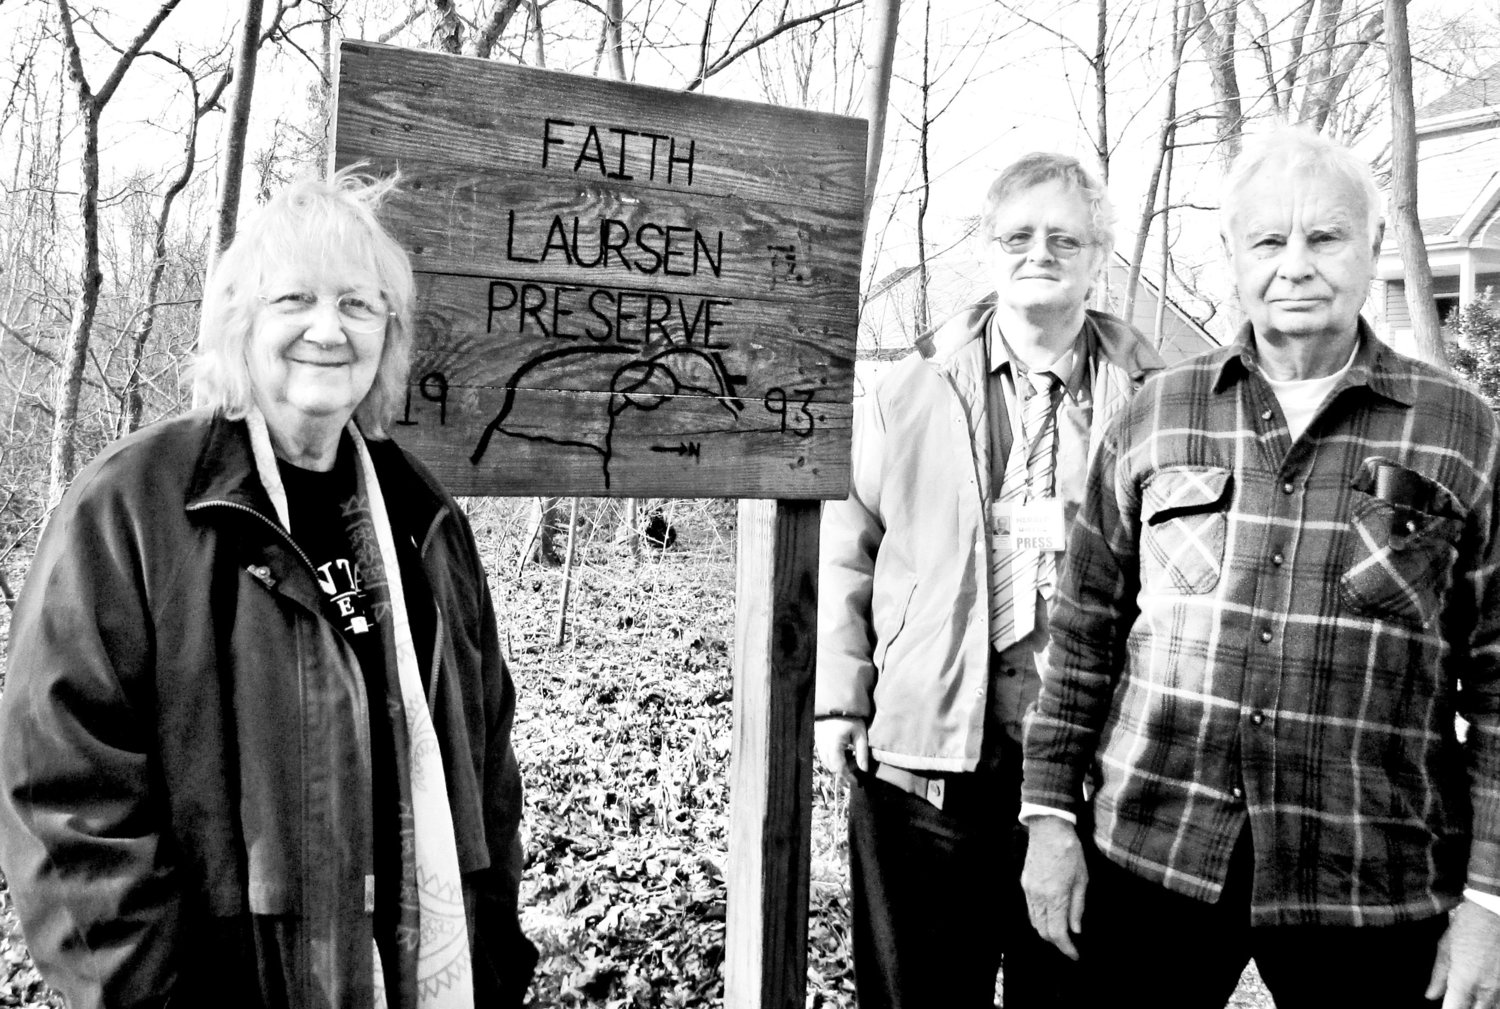 Paul Laursen, center, with Barbara and Bill Wood at the 25-acre Faith Laursen preserve, which was established in 1993 in his mother’s name.